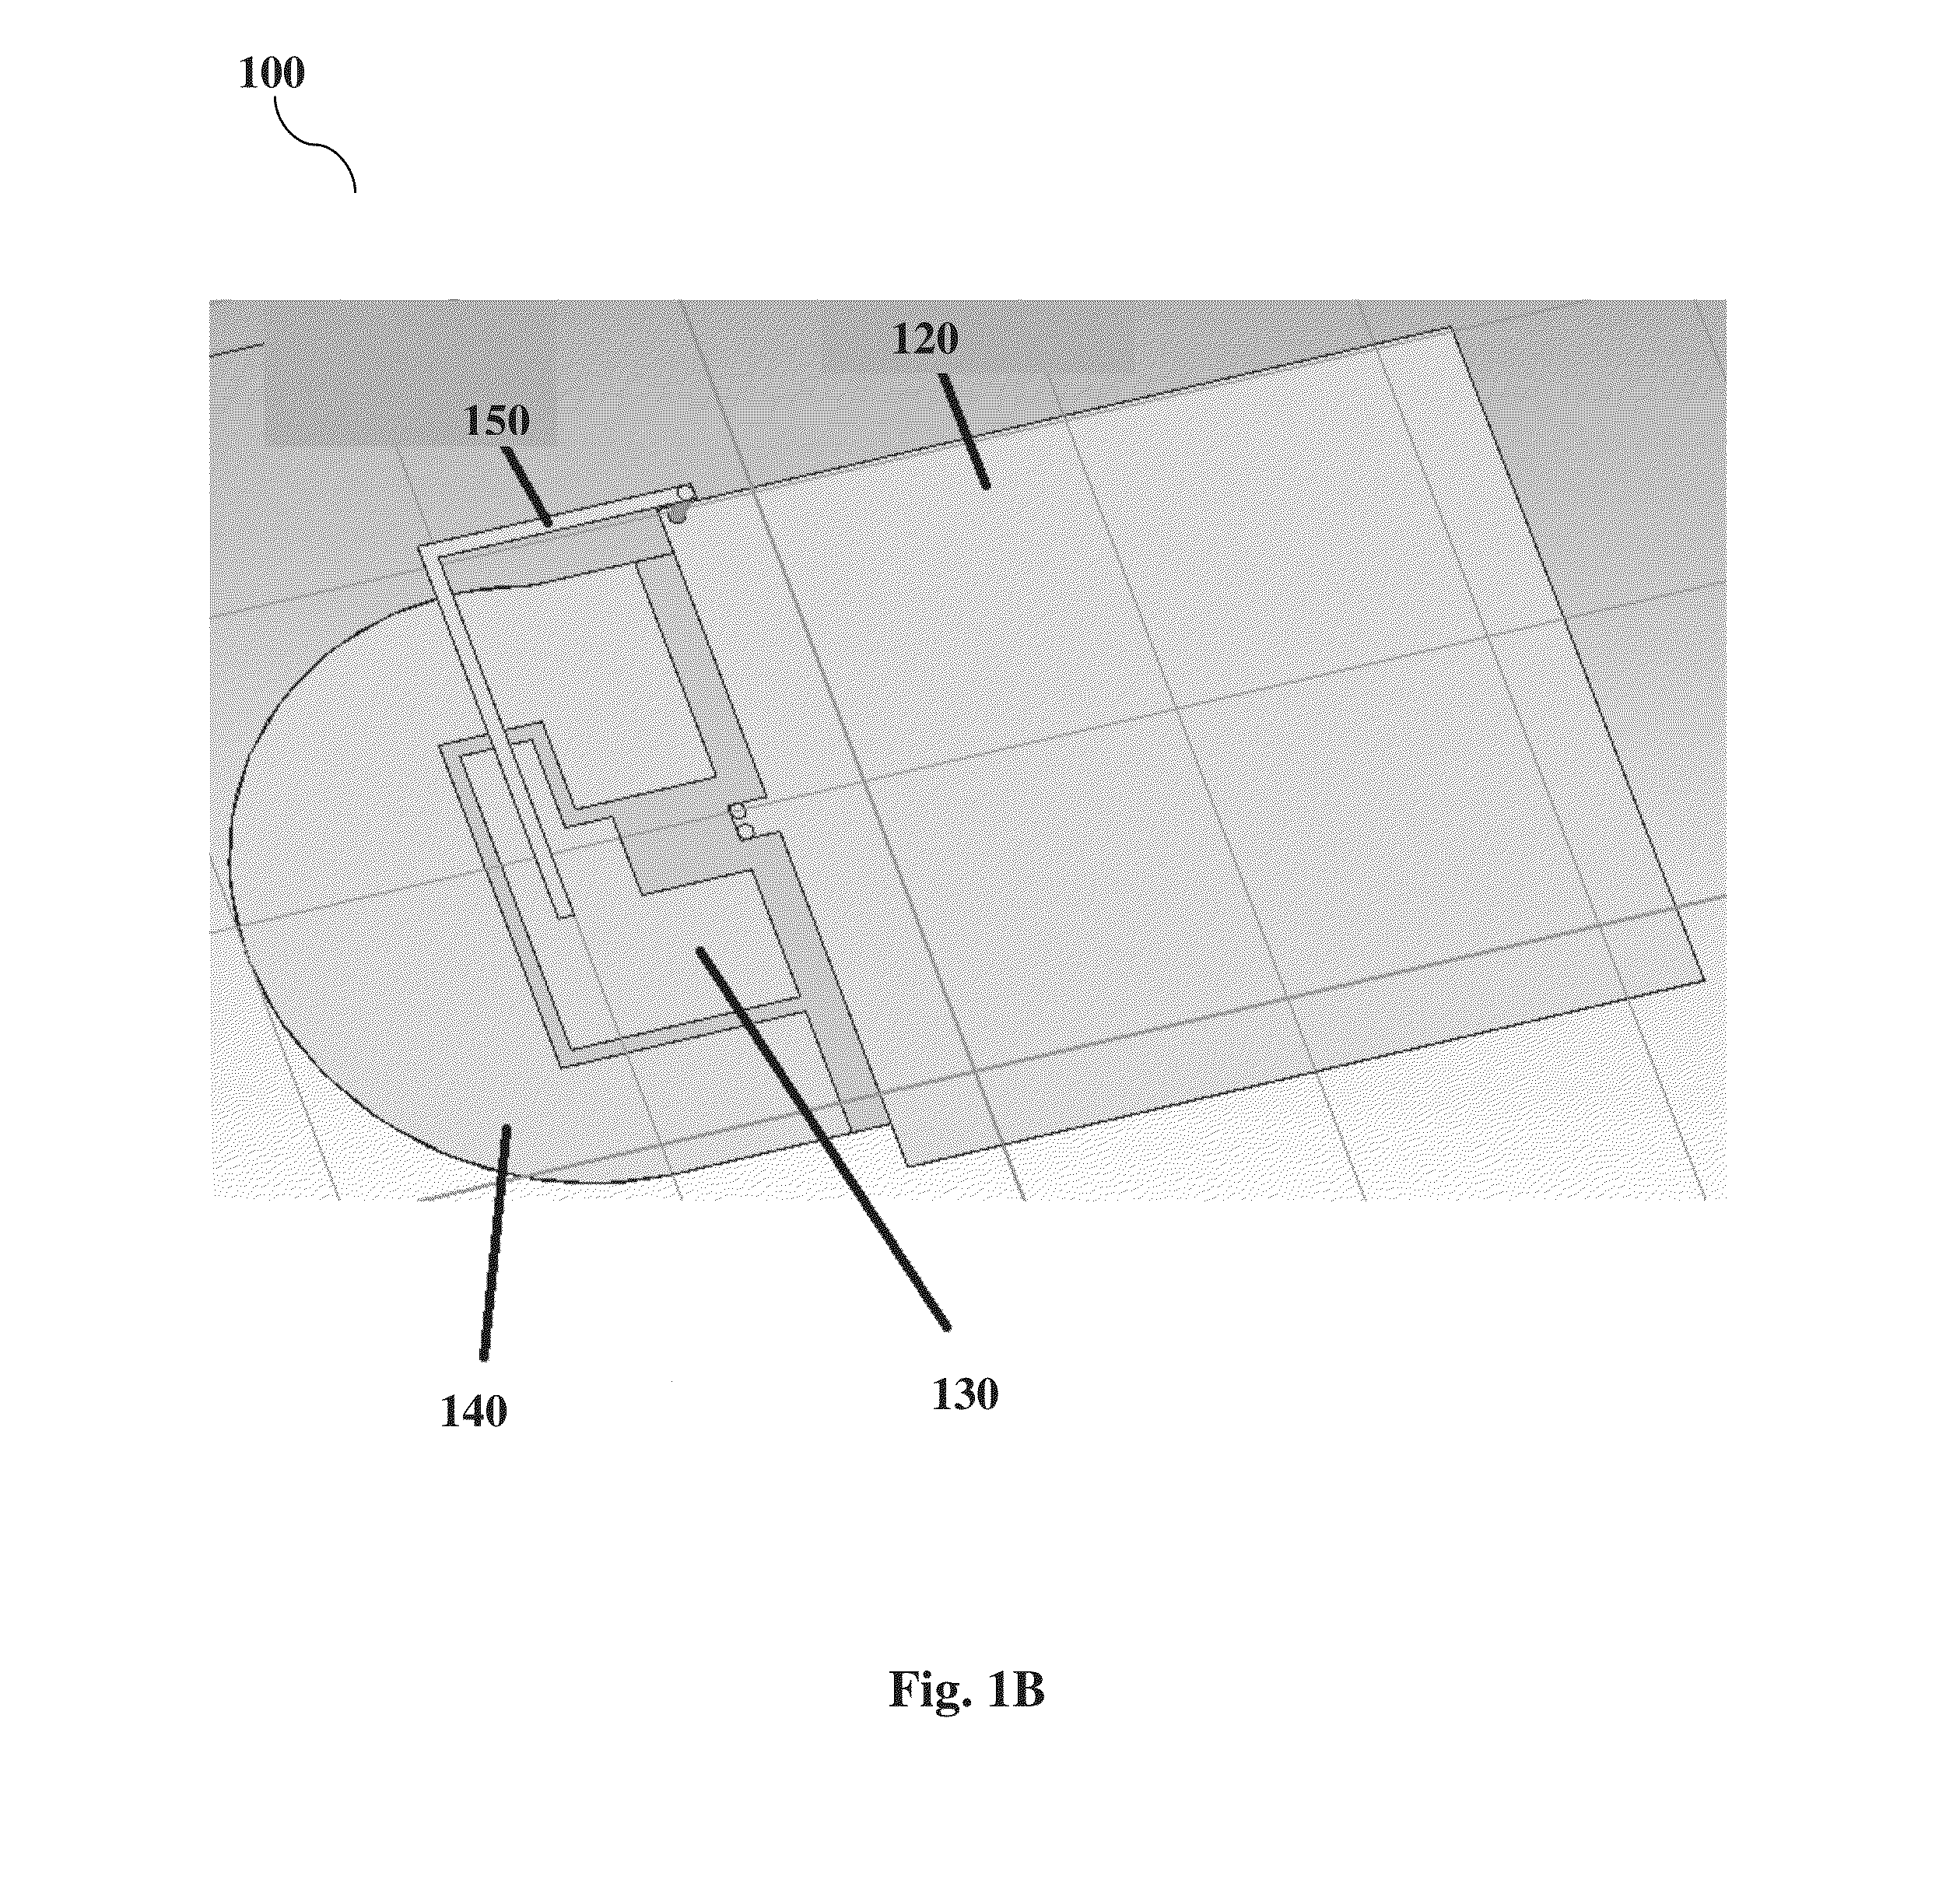 Antenna having a reflector for improved efficiency, gain, and directivity